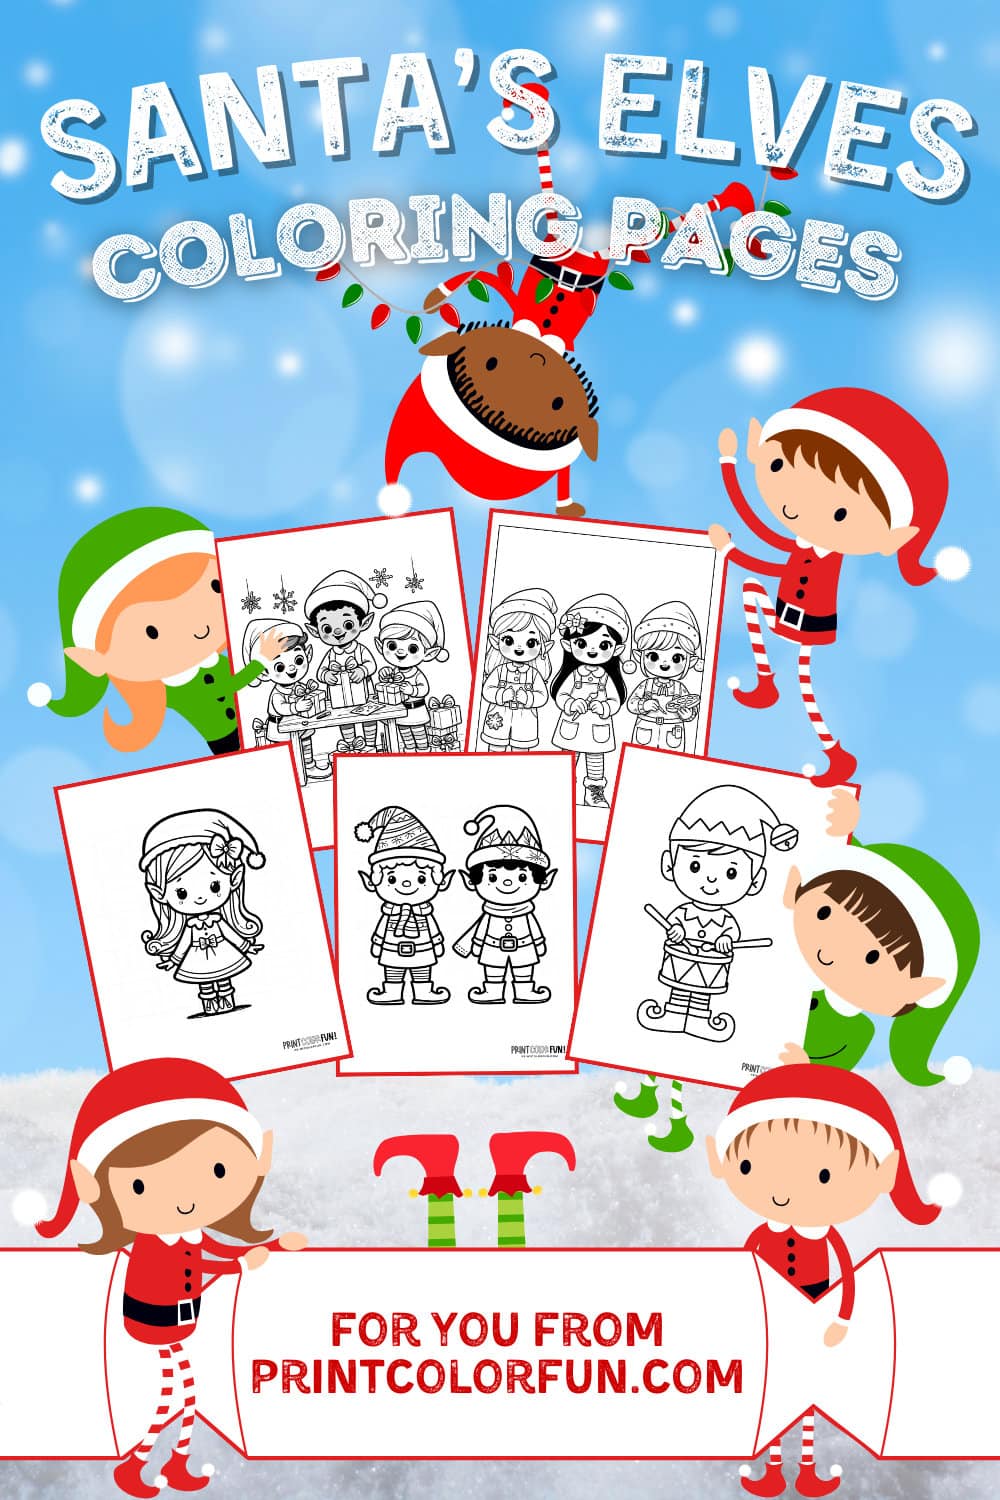 Santa's elves clipart: Christmas elf coloring pages from PrintColorFun com